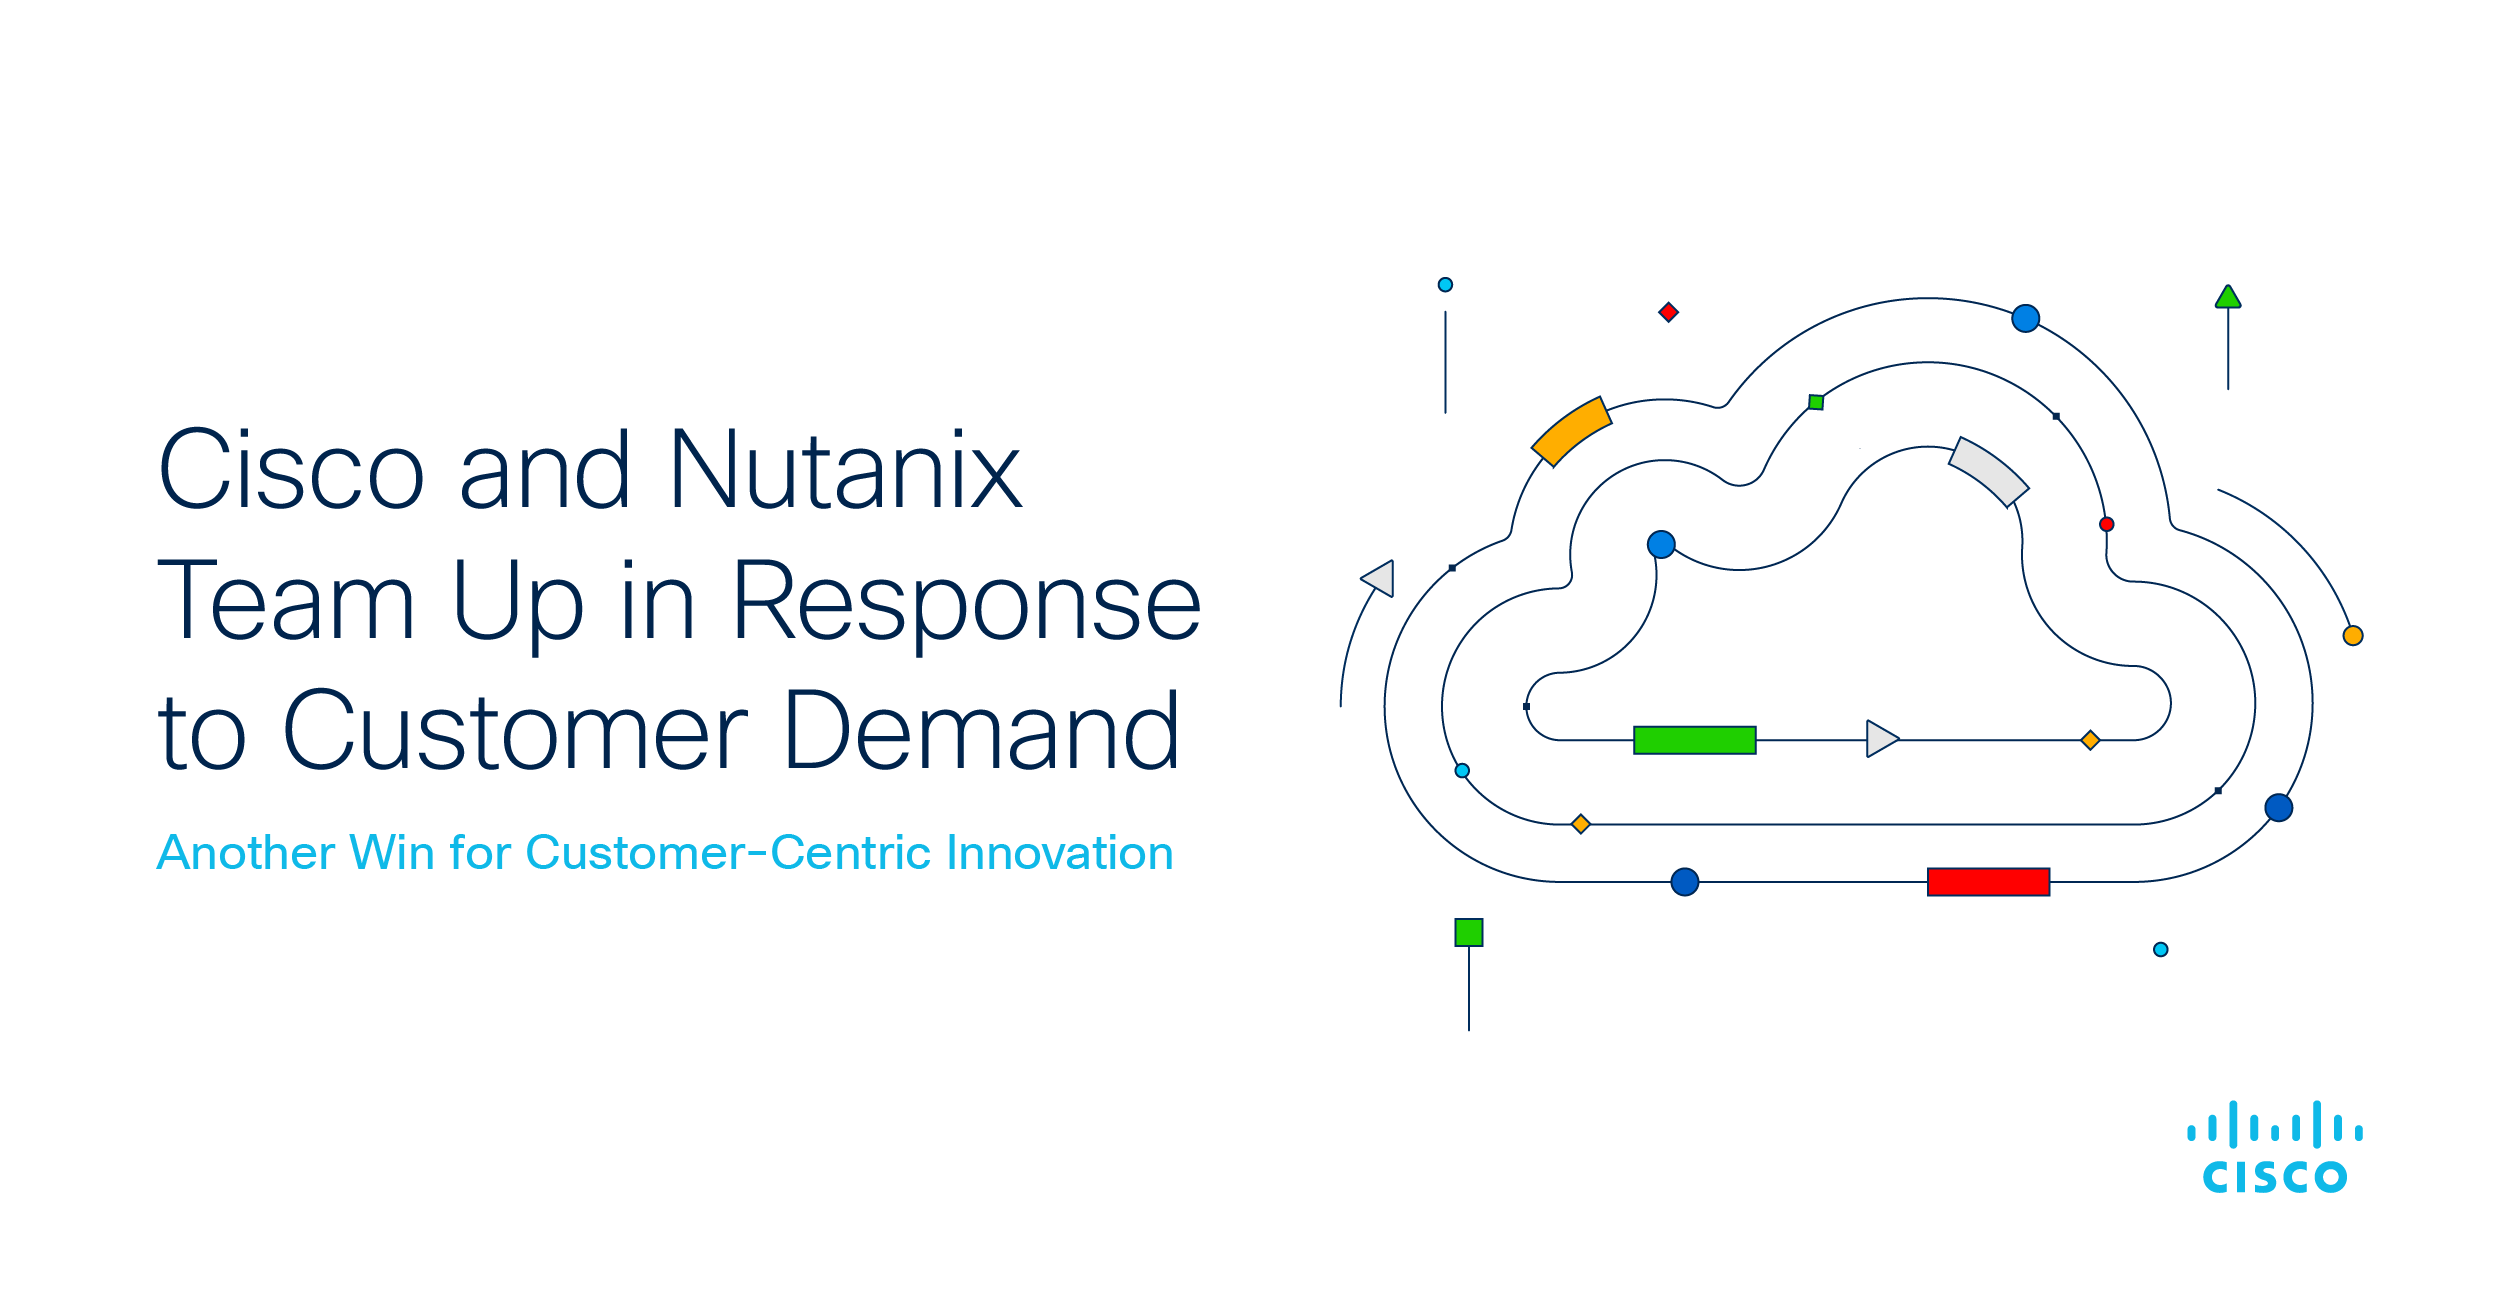 Cisco and Nutanix Team Up in Response to Customer Demand: Another Win for Customer-Centric Innovation